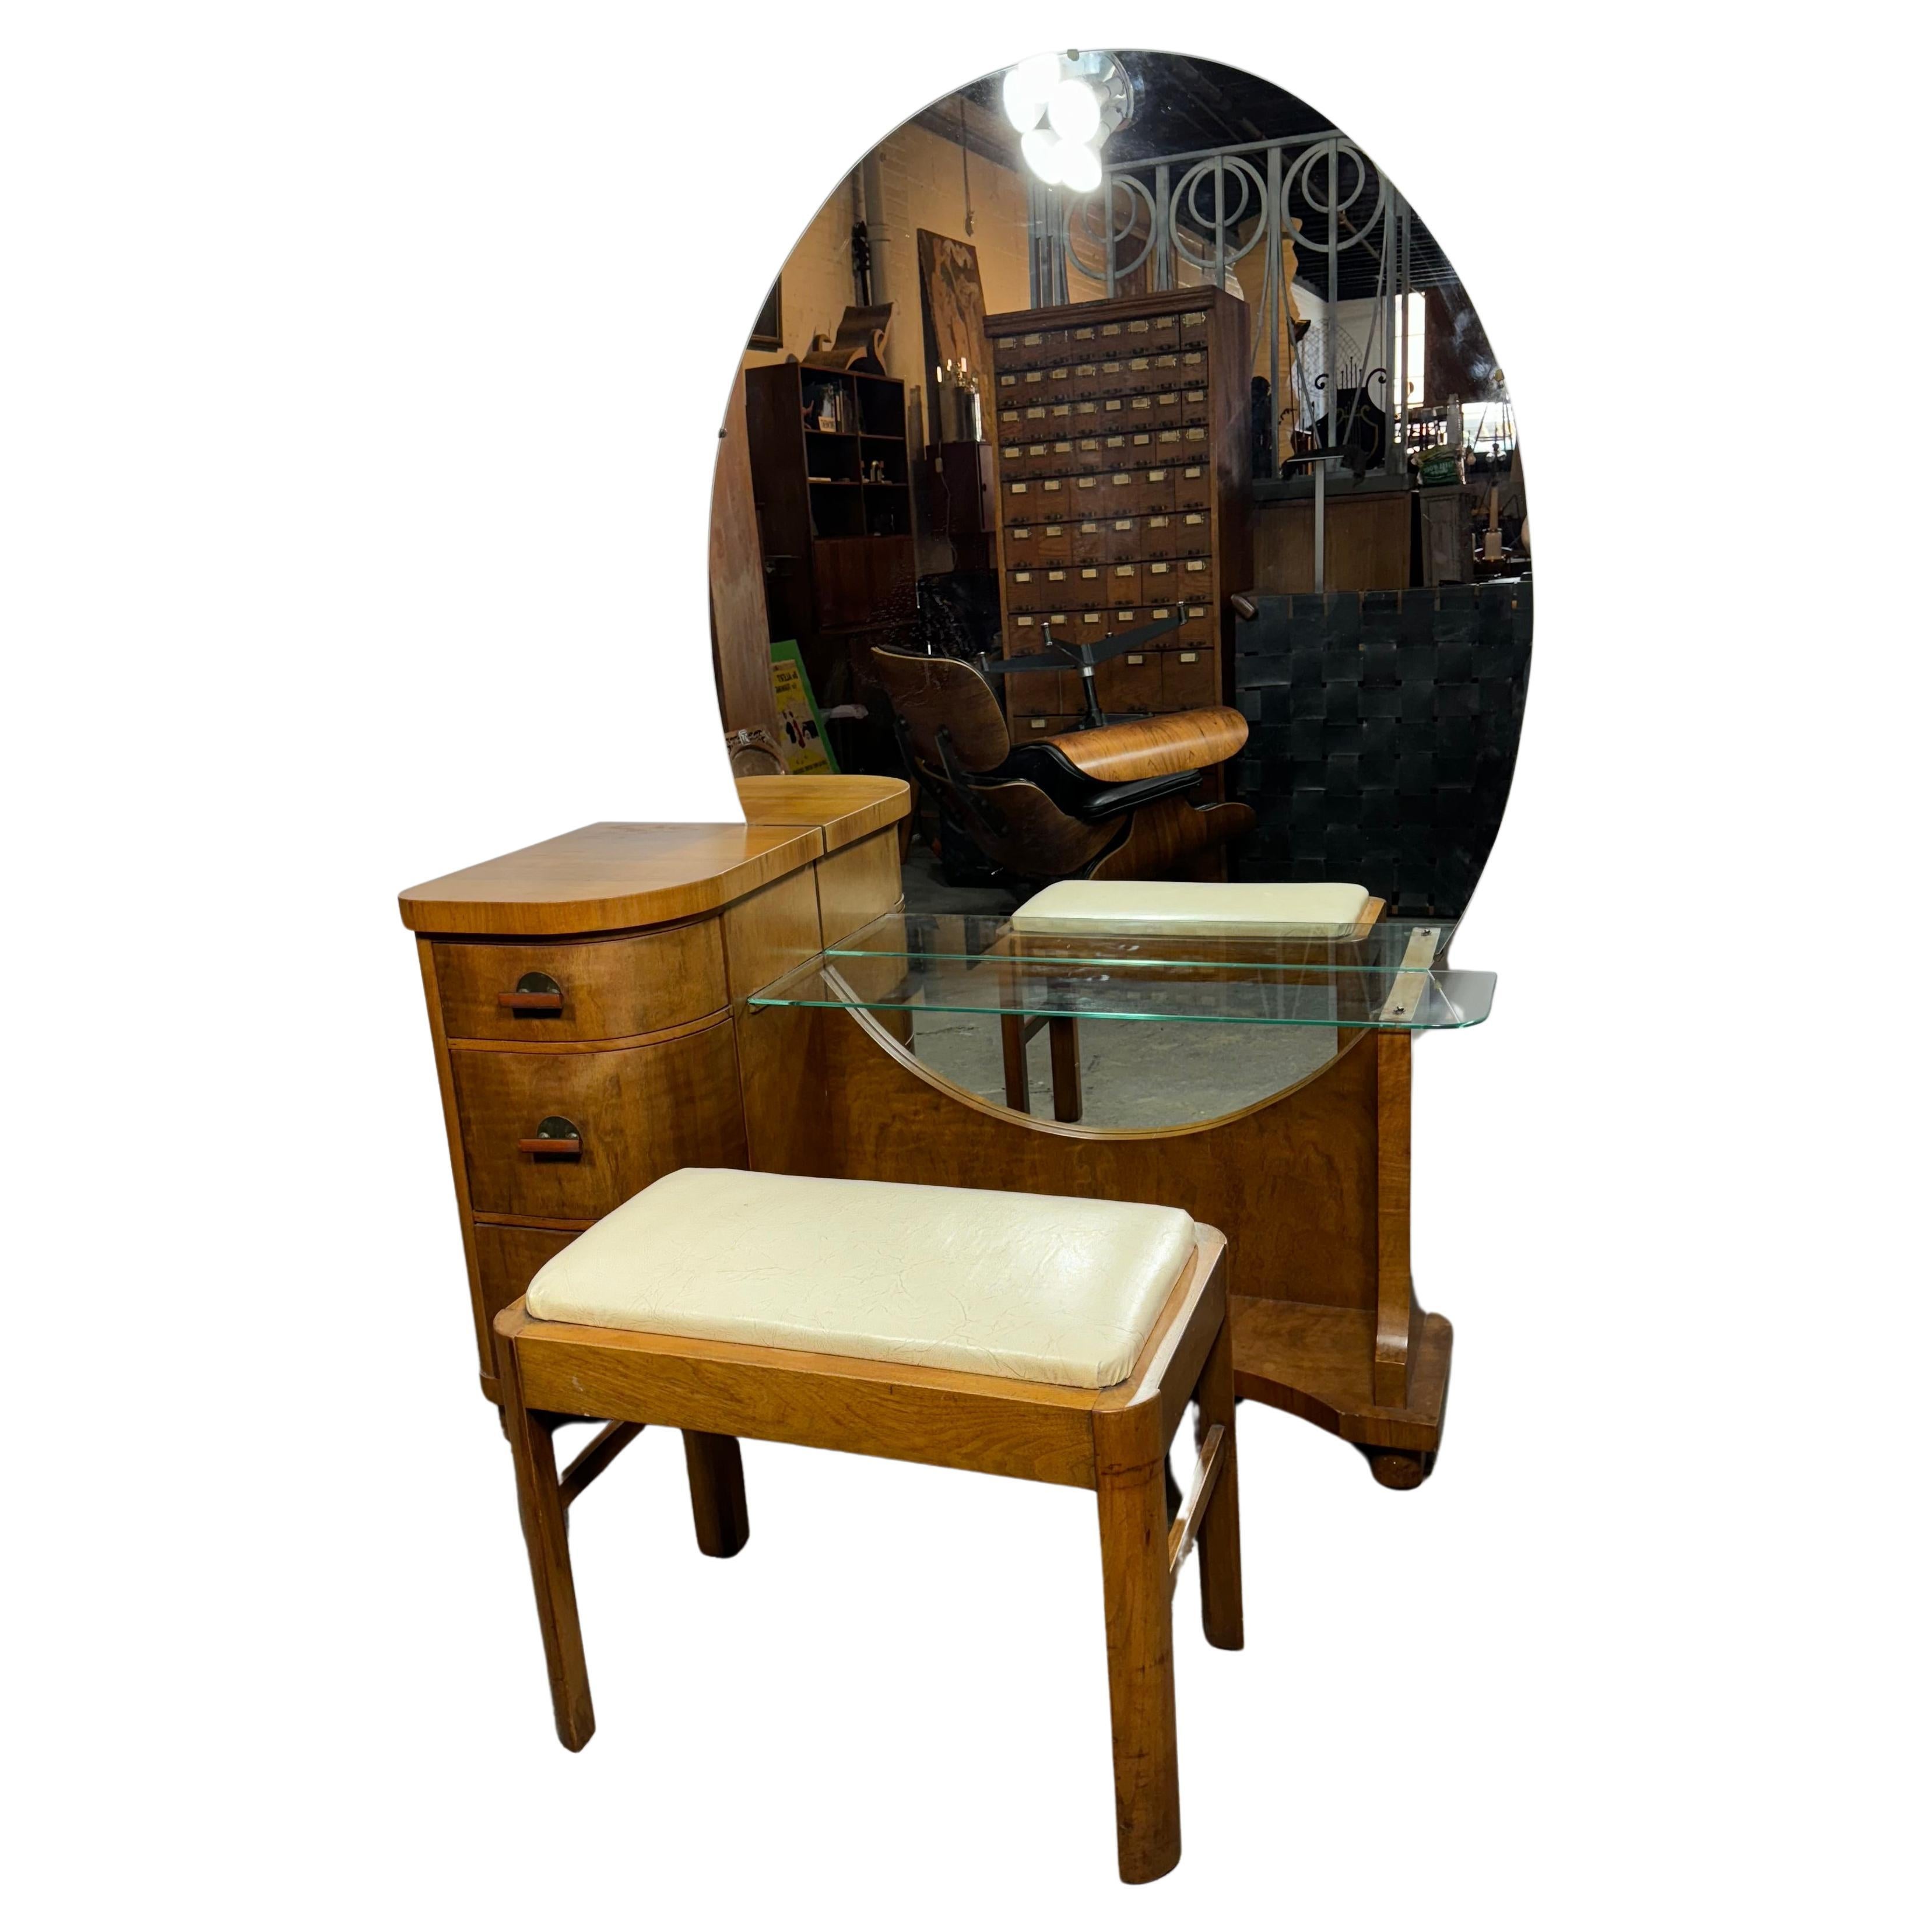 Mid-20th Century American Art Deco Vanity /Dressing Table and bench by Henry STEUL & sons For Sale